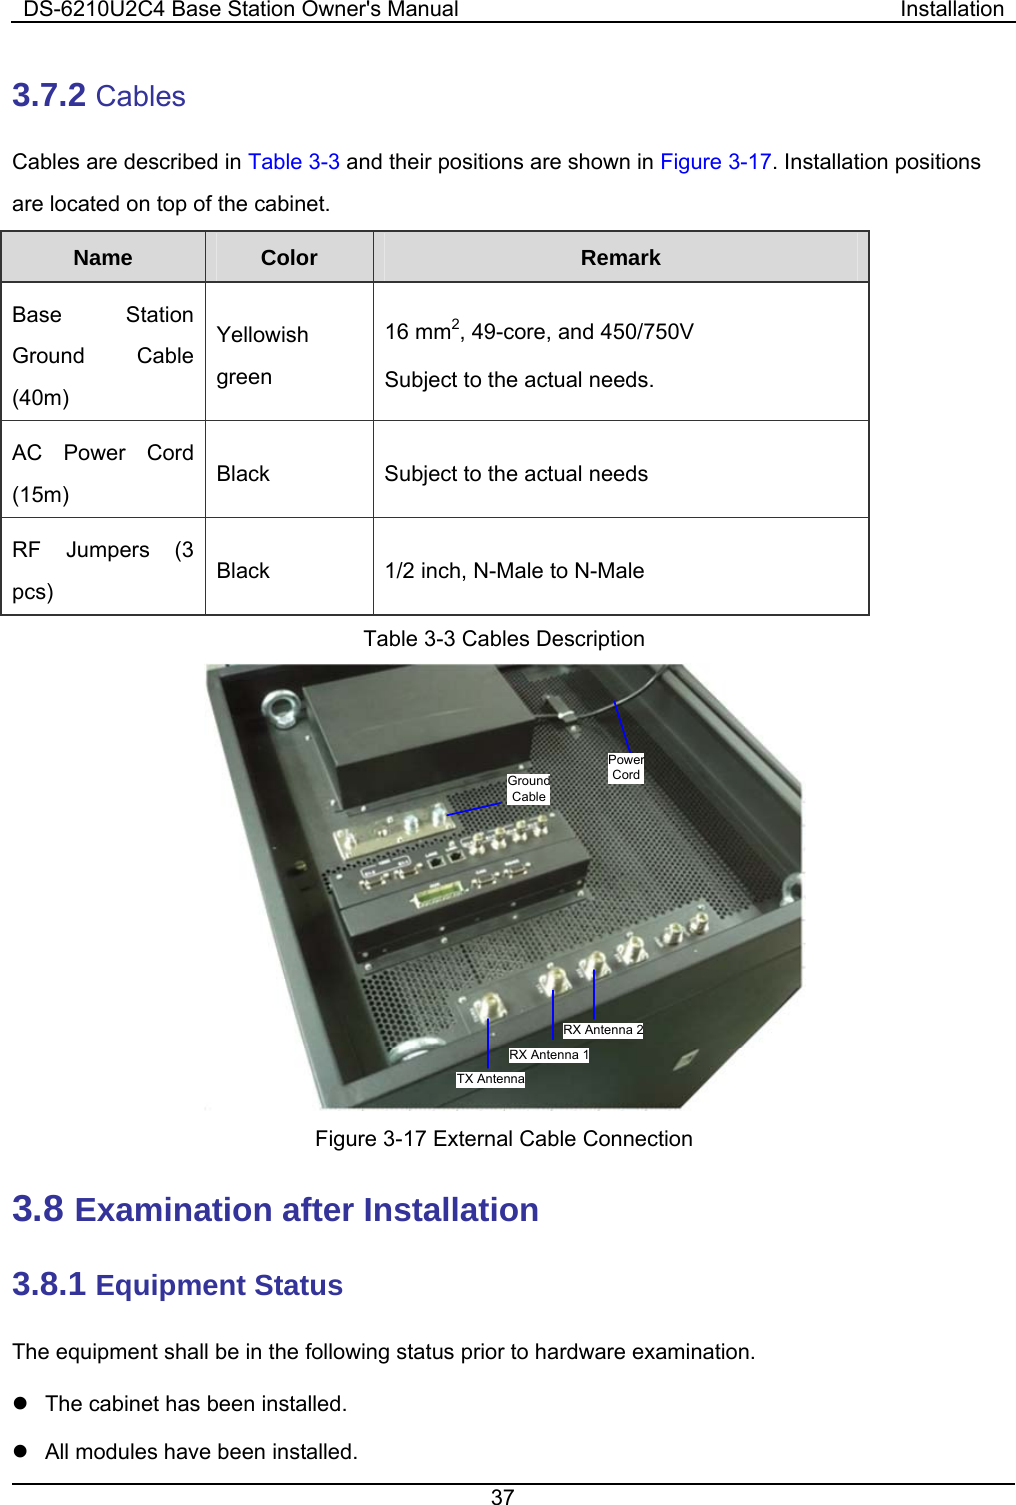 DS-6210U2C4 Base Station Owner&apos;s Manual  Installation 37  3.7.2 Cables Cables are described in Table 3-3 and their positions are shown in Figure 3-17. Installation positions are located on top of the cabinet. Name   Color  Remark  Base Station Ground Cable (40m) Yellowish green 16 mm2, 49-core, and 450/750V Subject to the actual needs.   AC Power Cord (15m) Black  Subject to the actual needs RF Jumpers (3 pcs) Black  1/2 inch, N-Male to N-Male Table 3-3 Cables Description   Power CordTX AntennaRX Antenna 1RX Antenna 2Ground Cable Figure 3-17 External Cable Connection   3.8 Examination after Installation 3.8.1 Equipment Status The equipment shall be in the following status prior to hardware examination.   z  The cabinet has been installed.   z  All modules have been installed.   